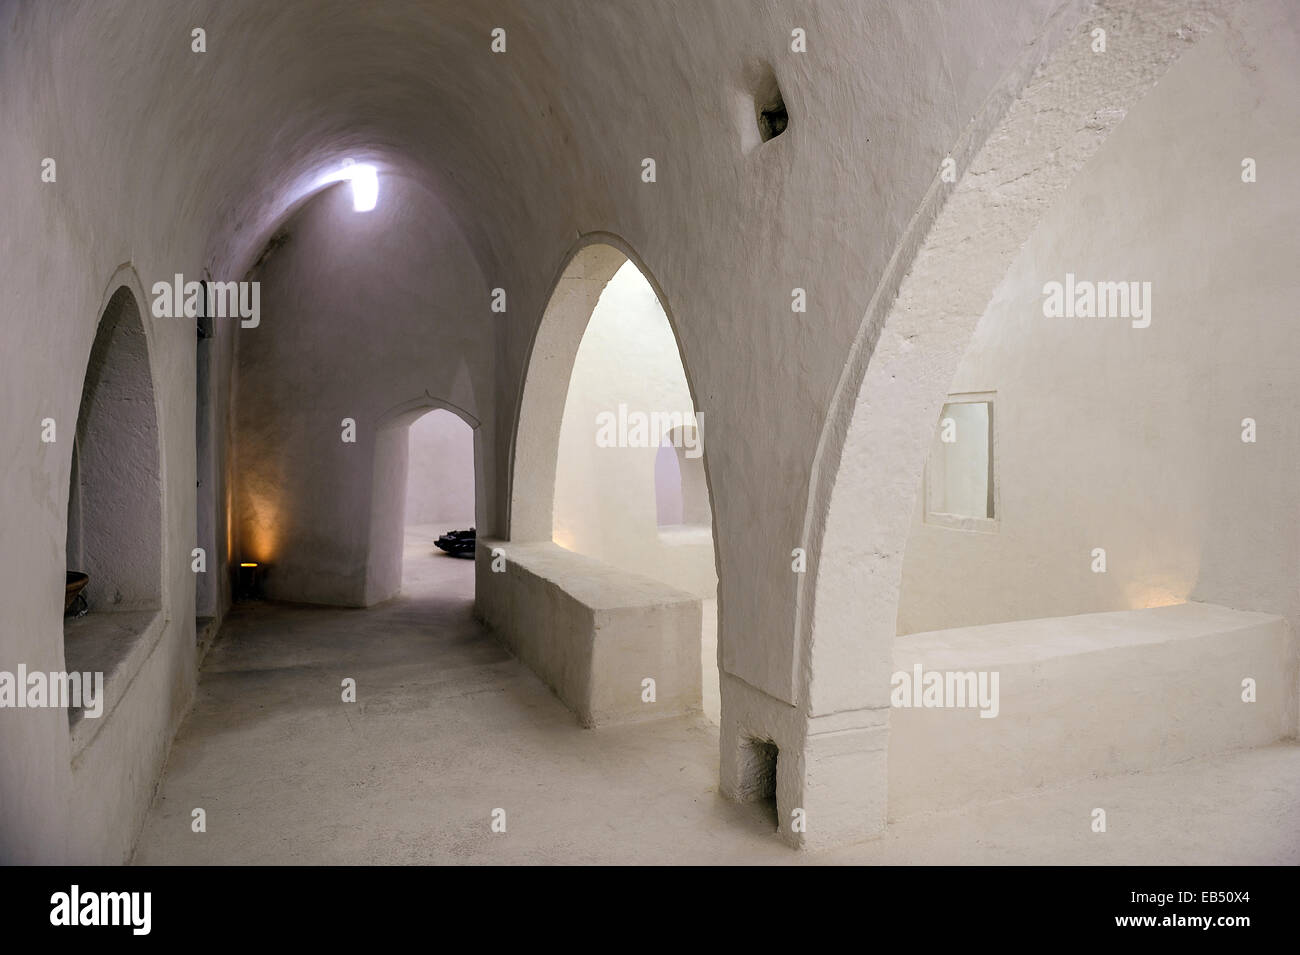 South of Tunisia, Djerba,the interior of the ancient Fadh Loon mosque Stock Photo